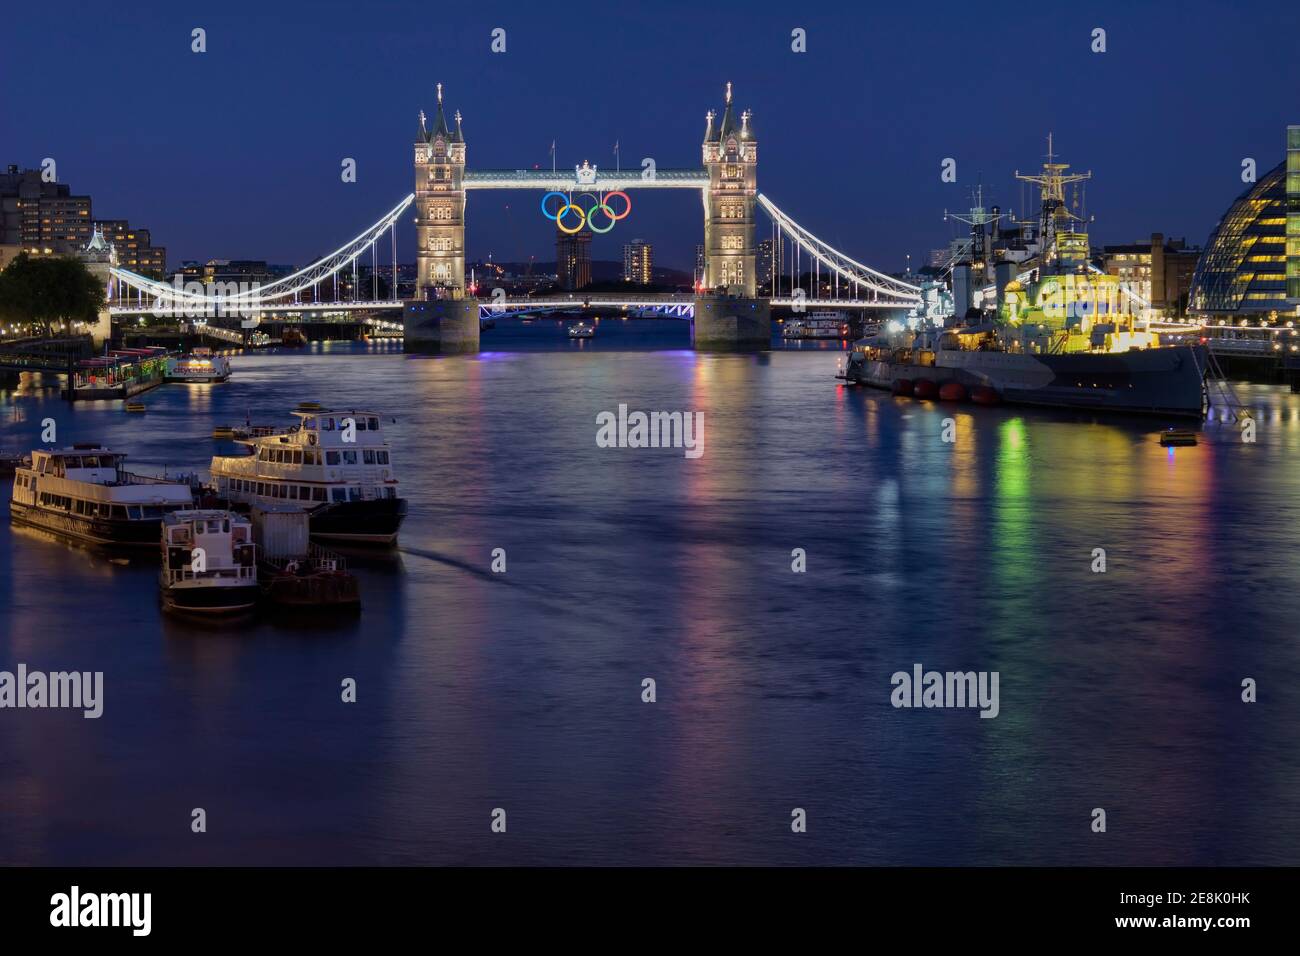 LONDON - AUGUST 2012; Tower Bridge with Olympic rings during the Olympic Games. Stock Photo